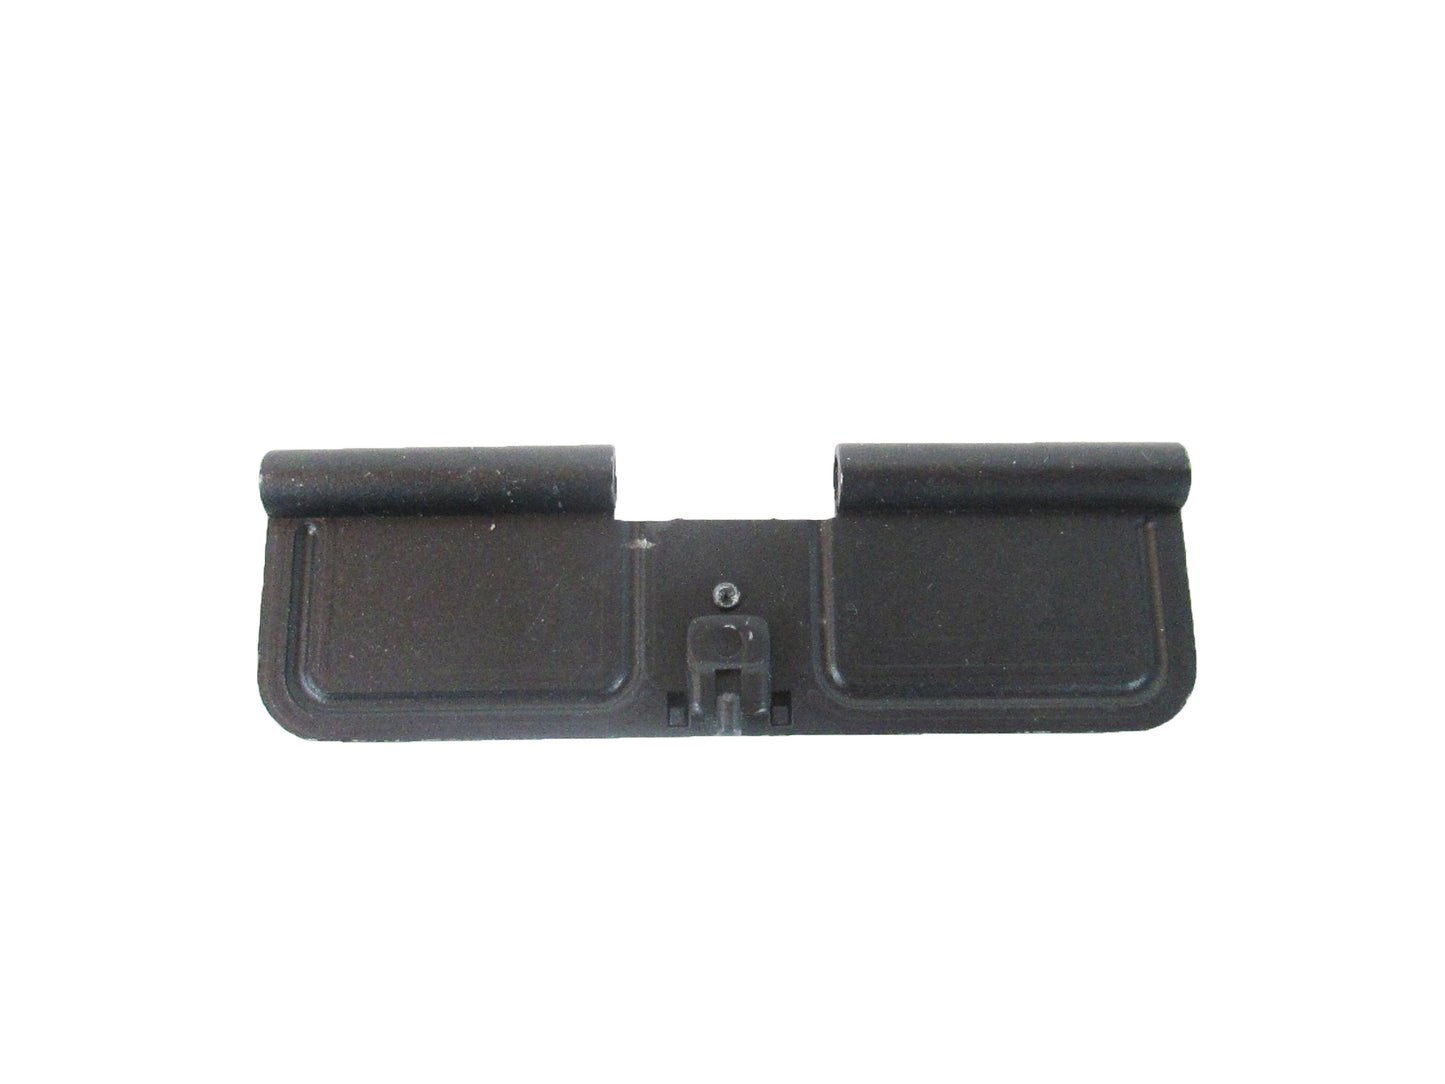 Full Metal M4 M16 Dust Cover Replacement – Lock N Load Airsoft